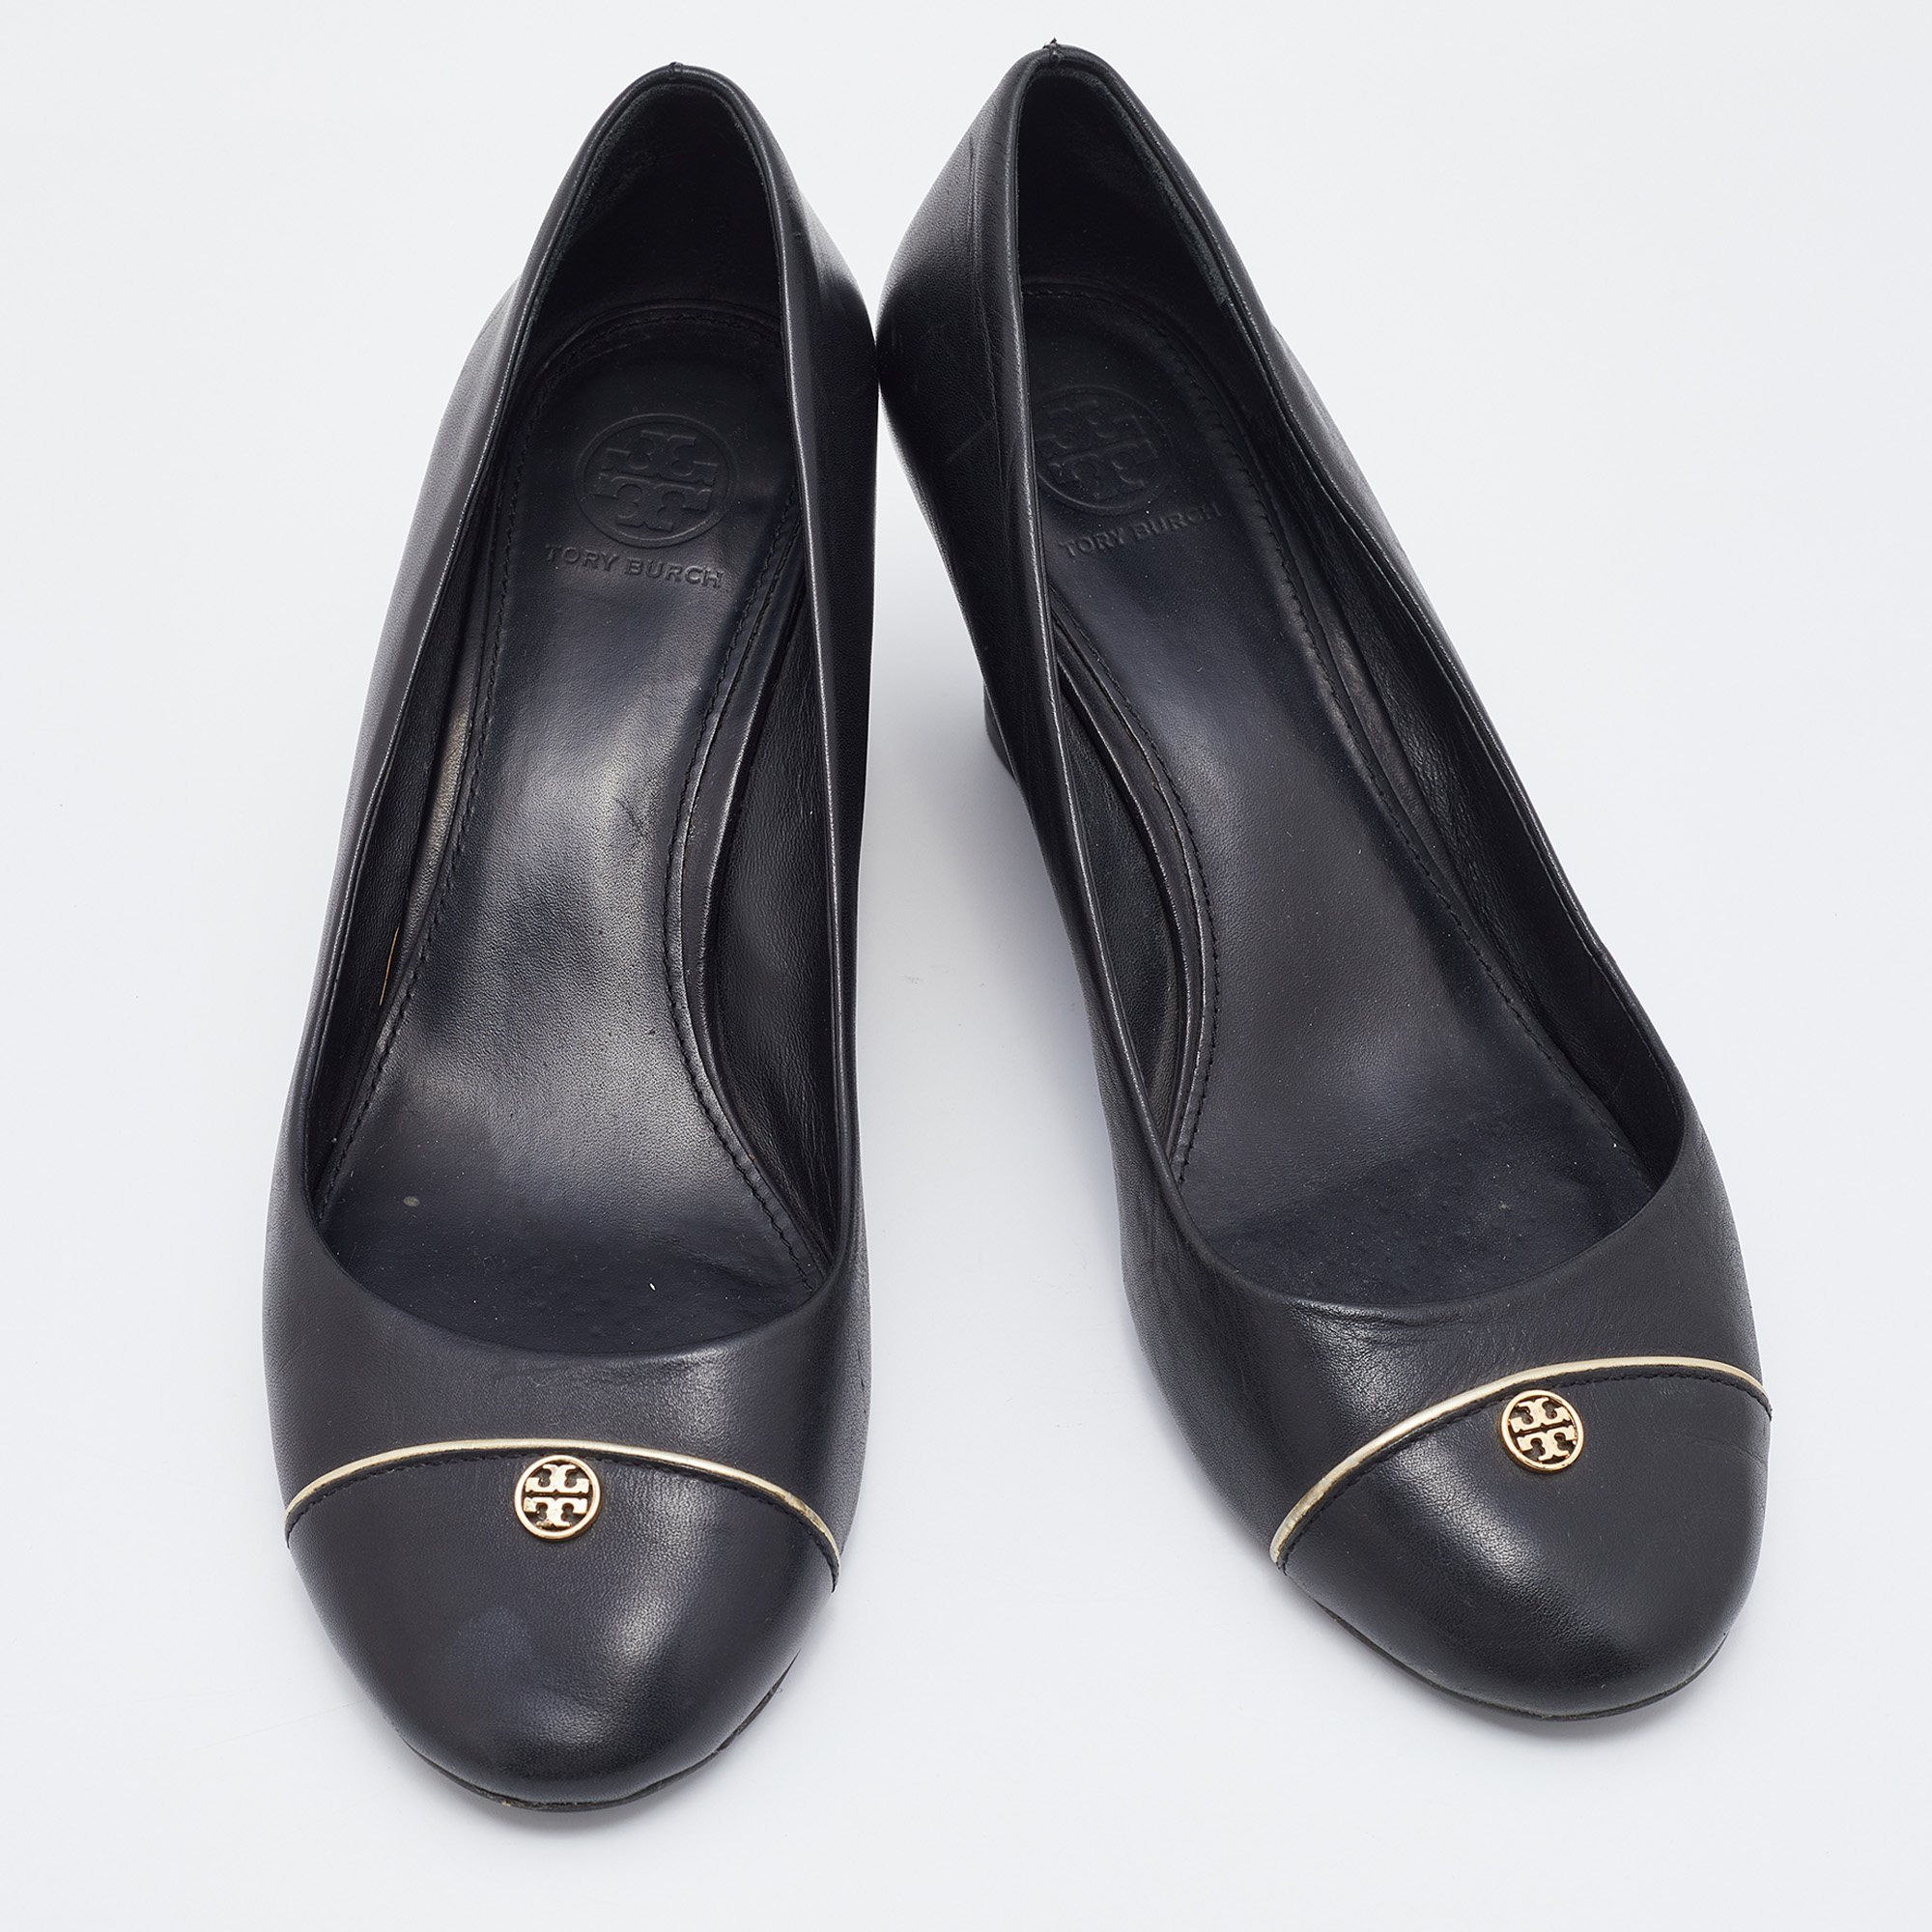 Tory Burch Black Leather Cap Toe Wedge Pumps Size 40